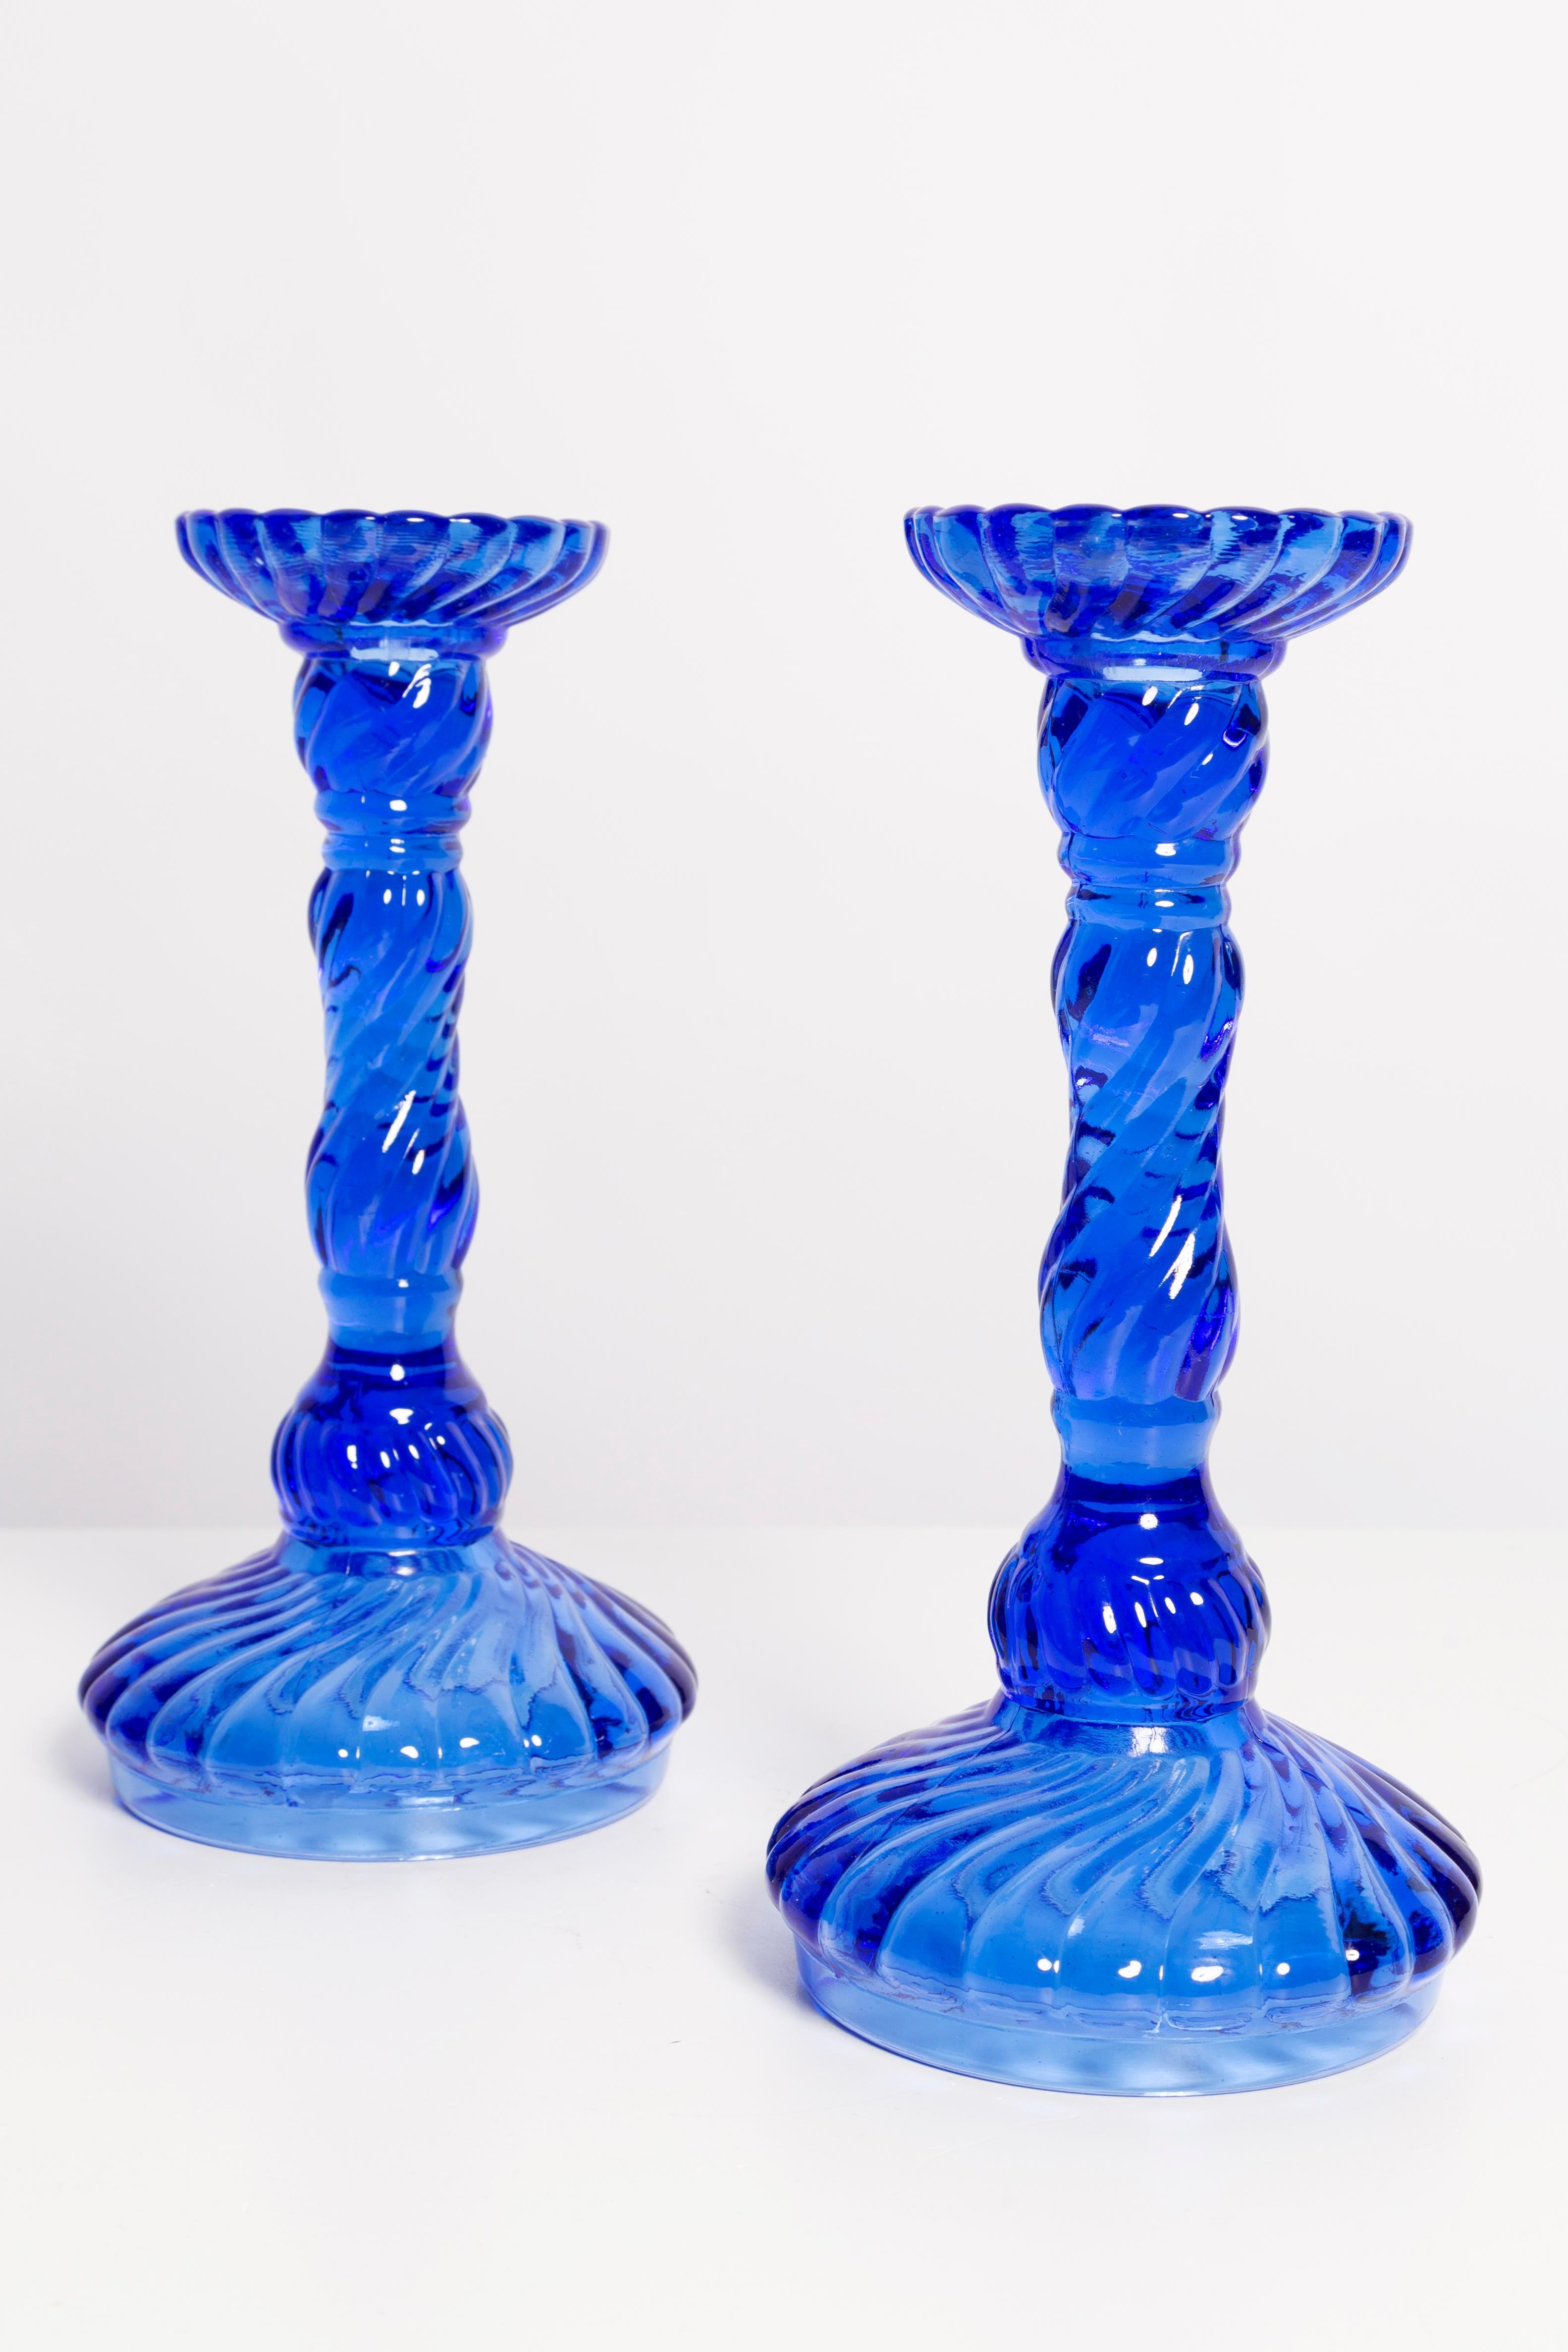 Polish Set of Two Mid-Century Deep Blue Glass Candlesticks, Europe, 1960s For Sale